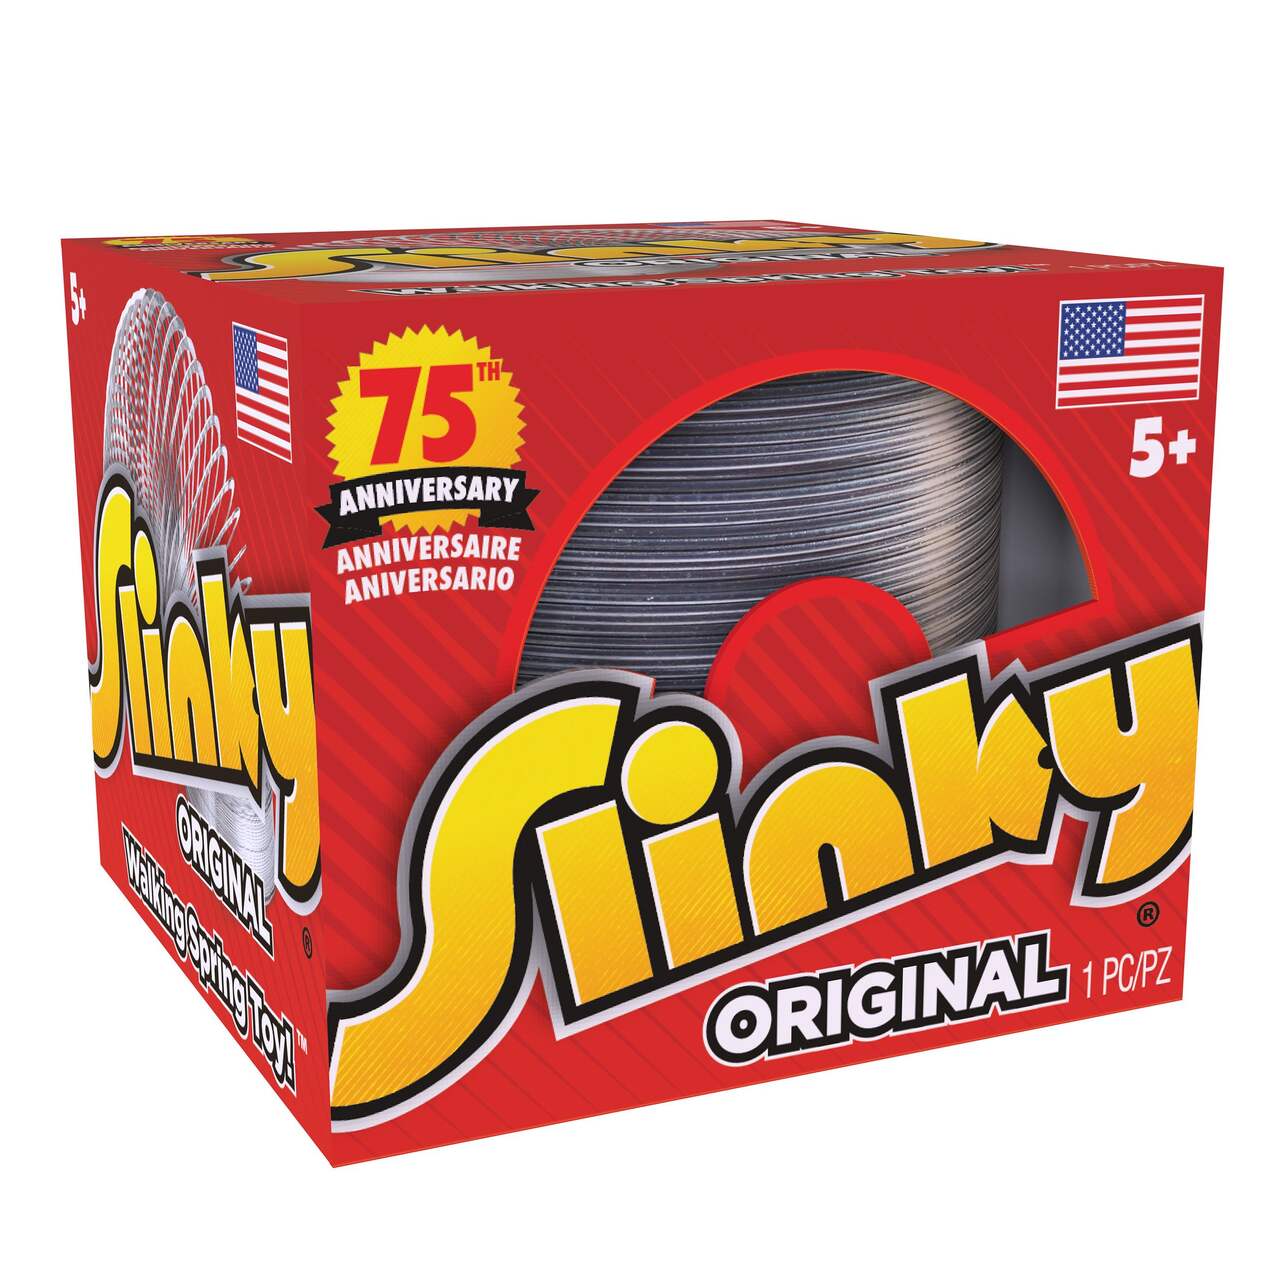 Slinky® Original Metal Classic Spring Toy For Adults & Kids, Ages